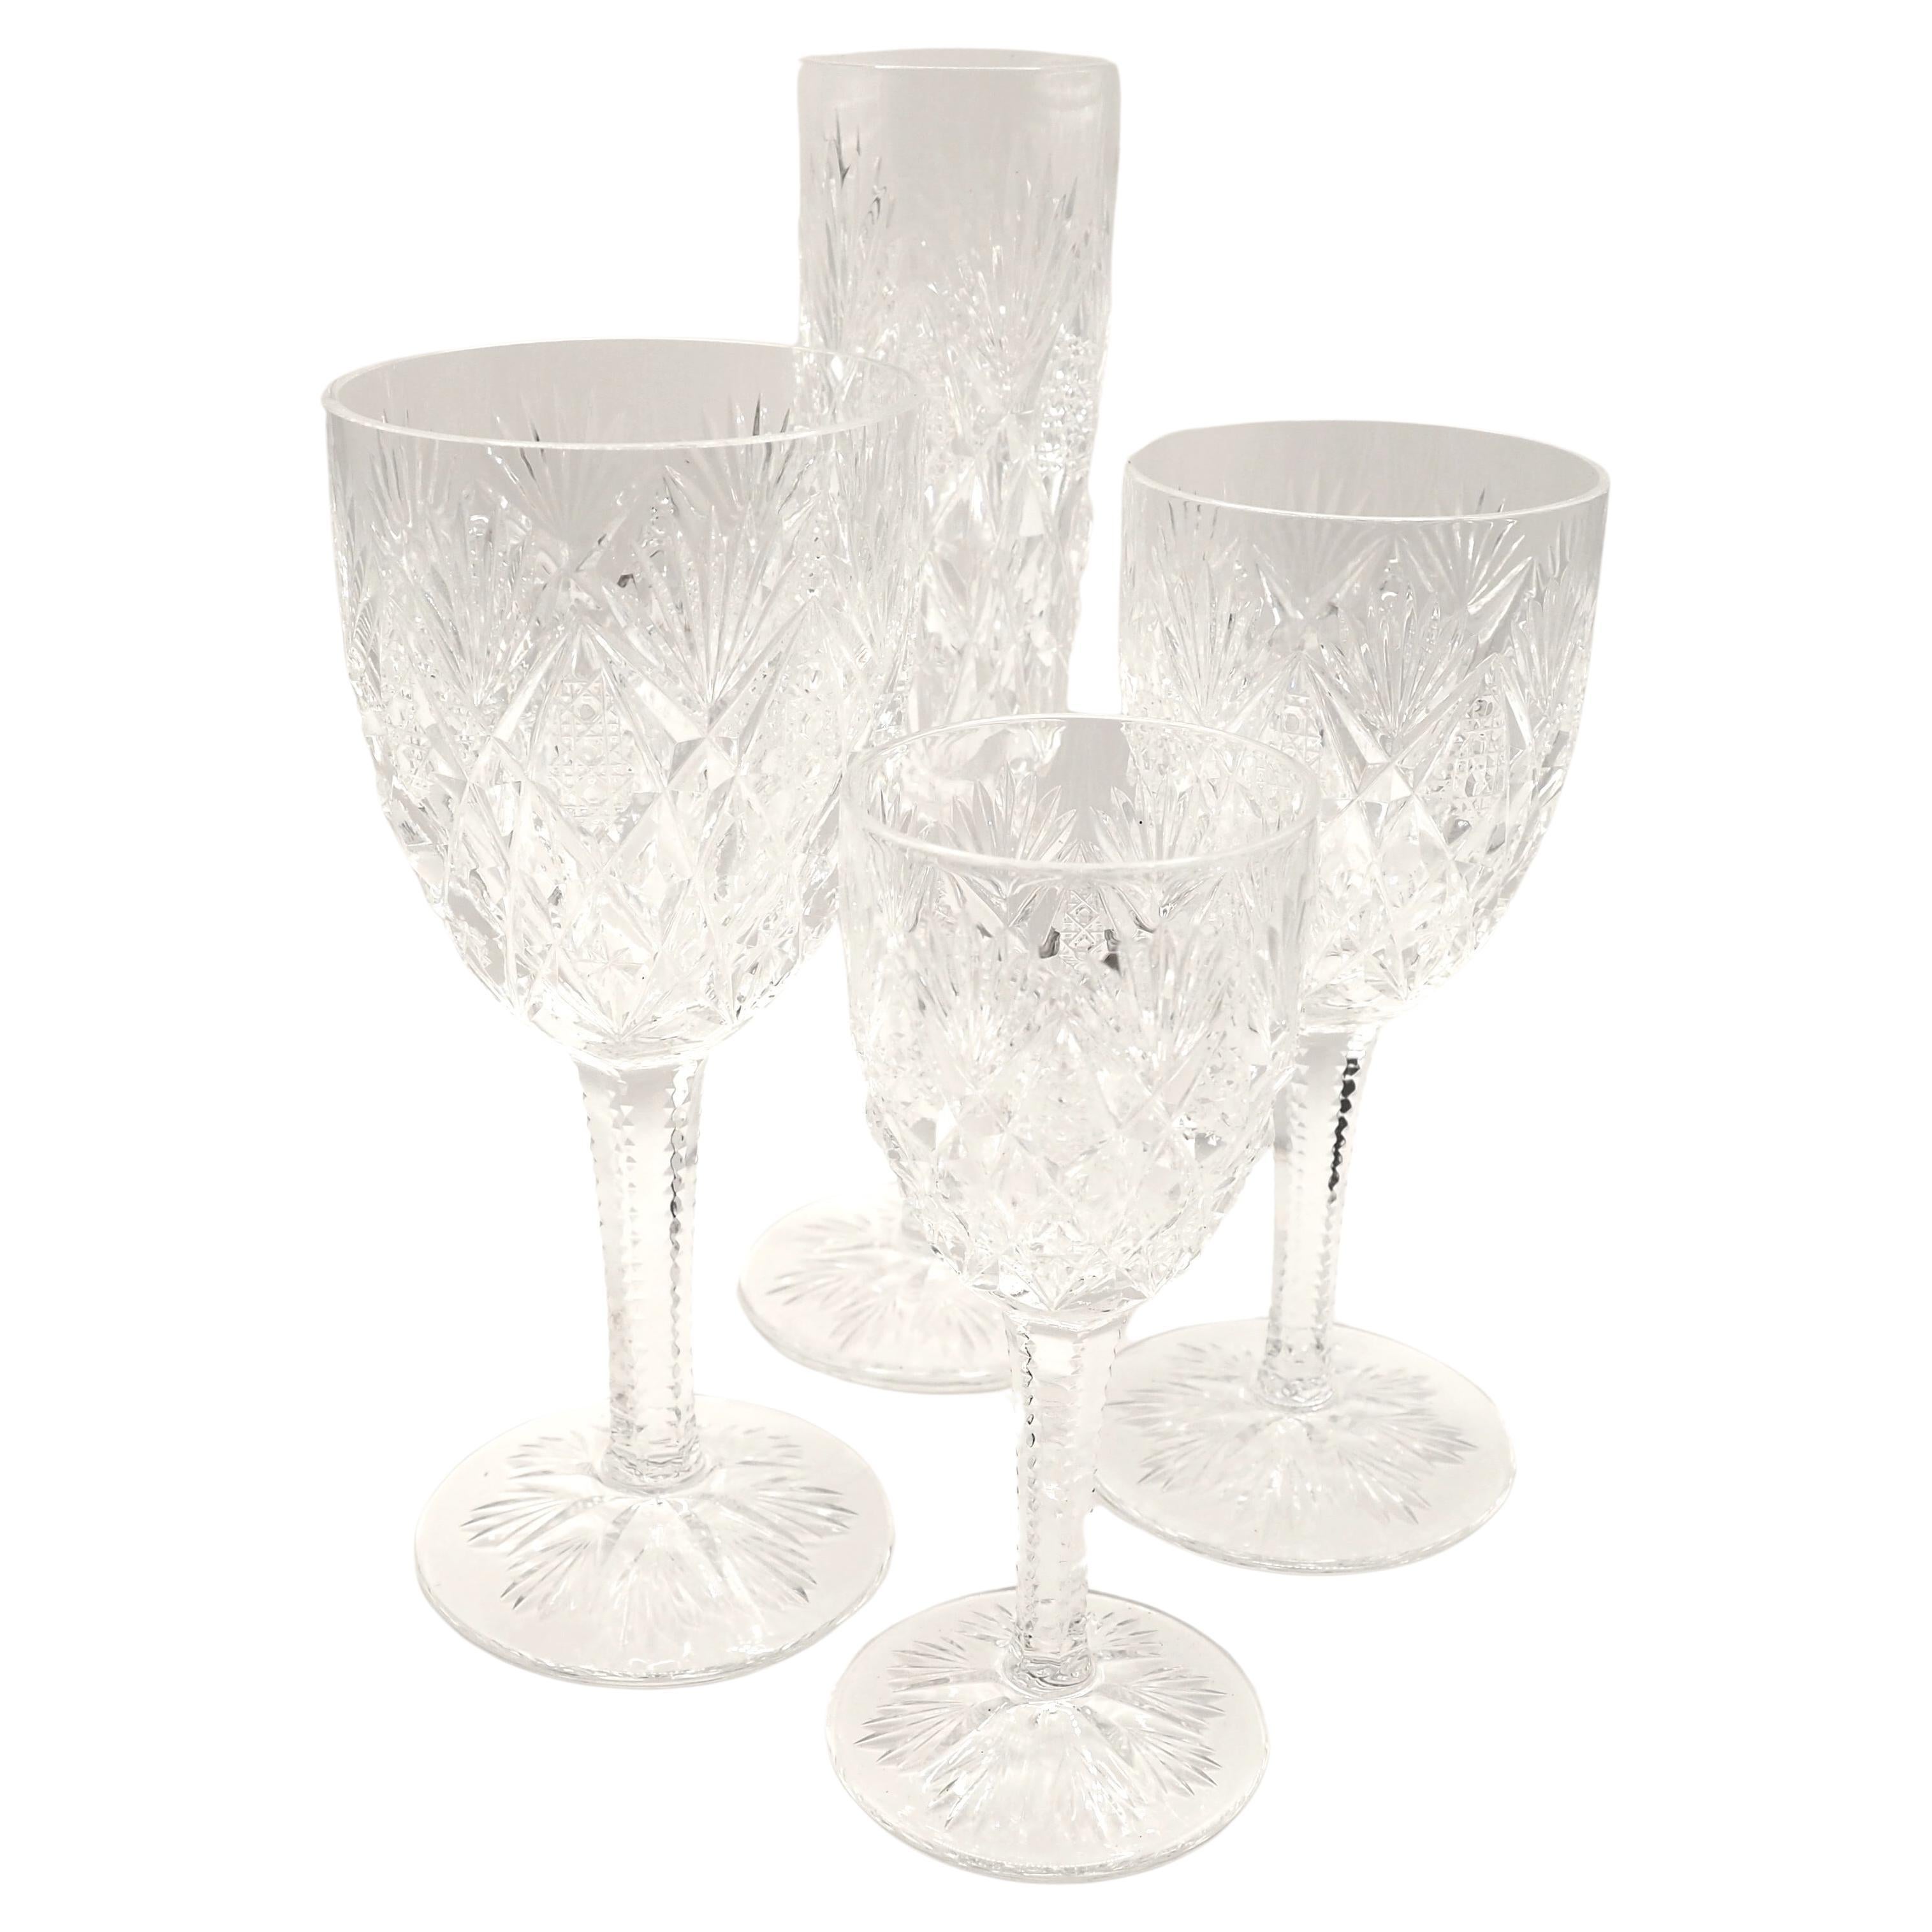 https://a.1stdibscdn.com/set-of-st-louis-crystal-glasses-for-6-florence-pattern-signed-24-pieces-for-sale/f_76552/f_362413521695196460781/f_36241352_1695196461975_bg_processed.jpg